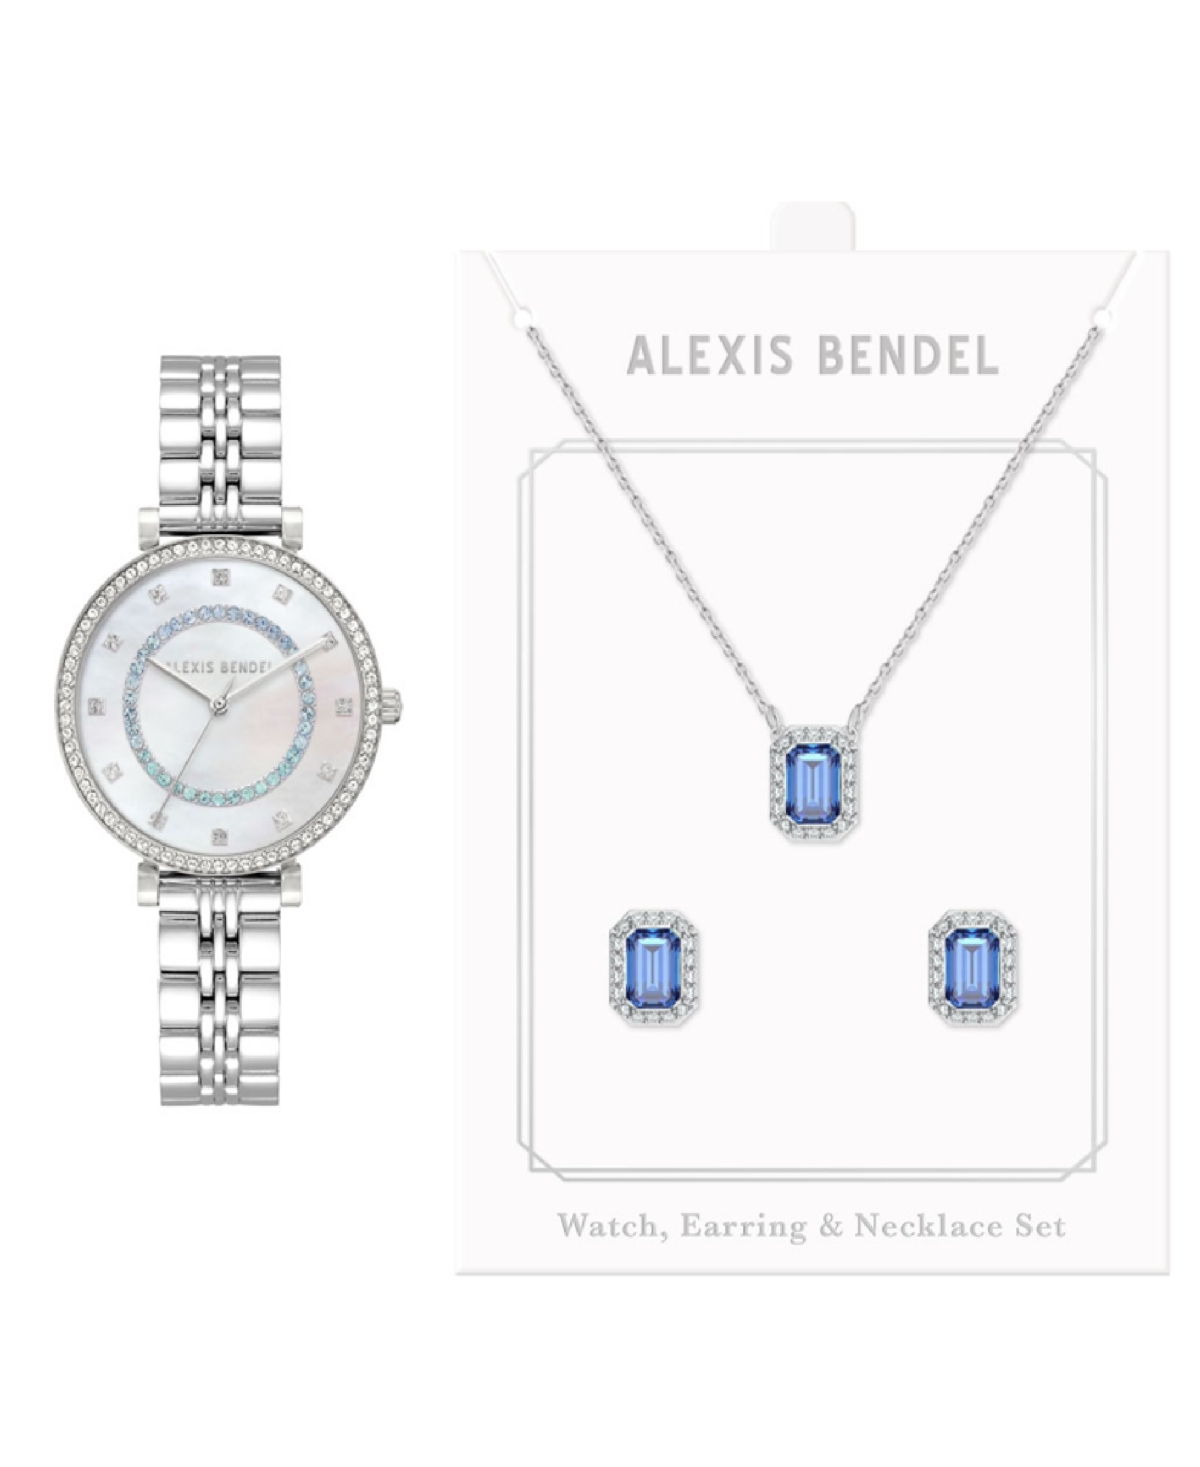 Women's Quartz Silver-Tone Alloy Watch 31mm Gift Set - Shiny Silver, White Mother of Pearl